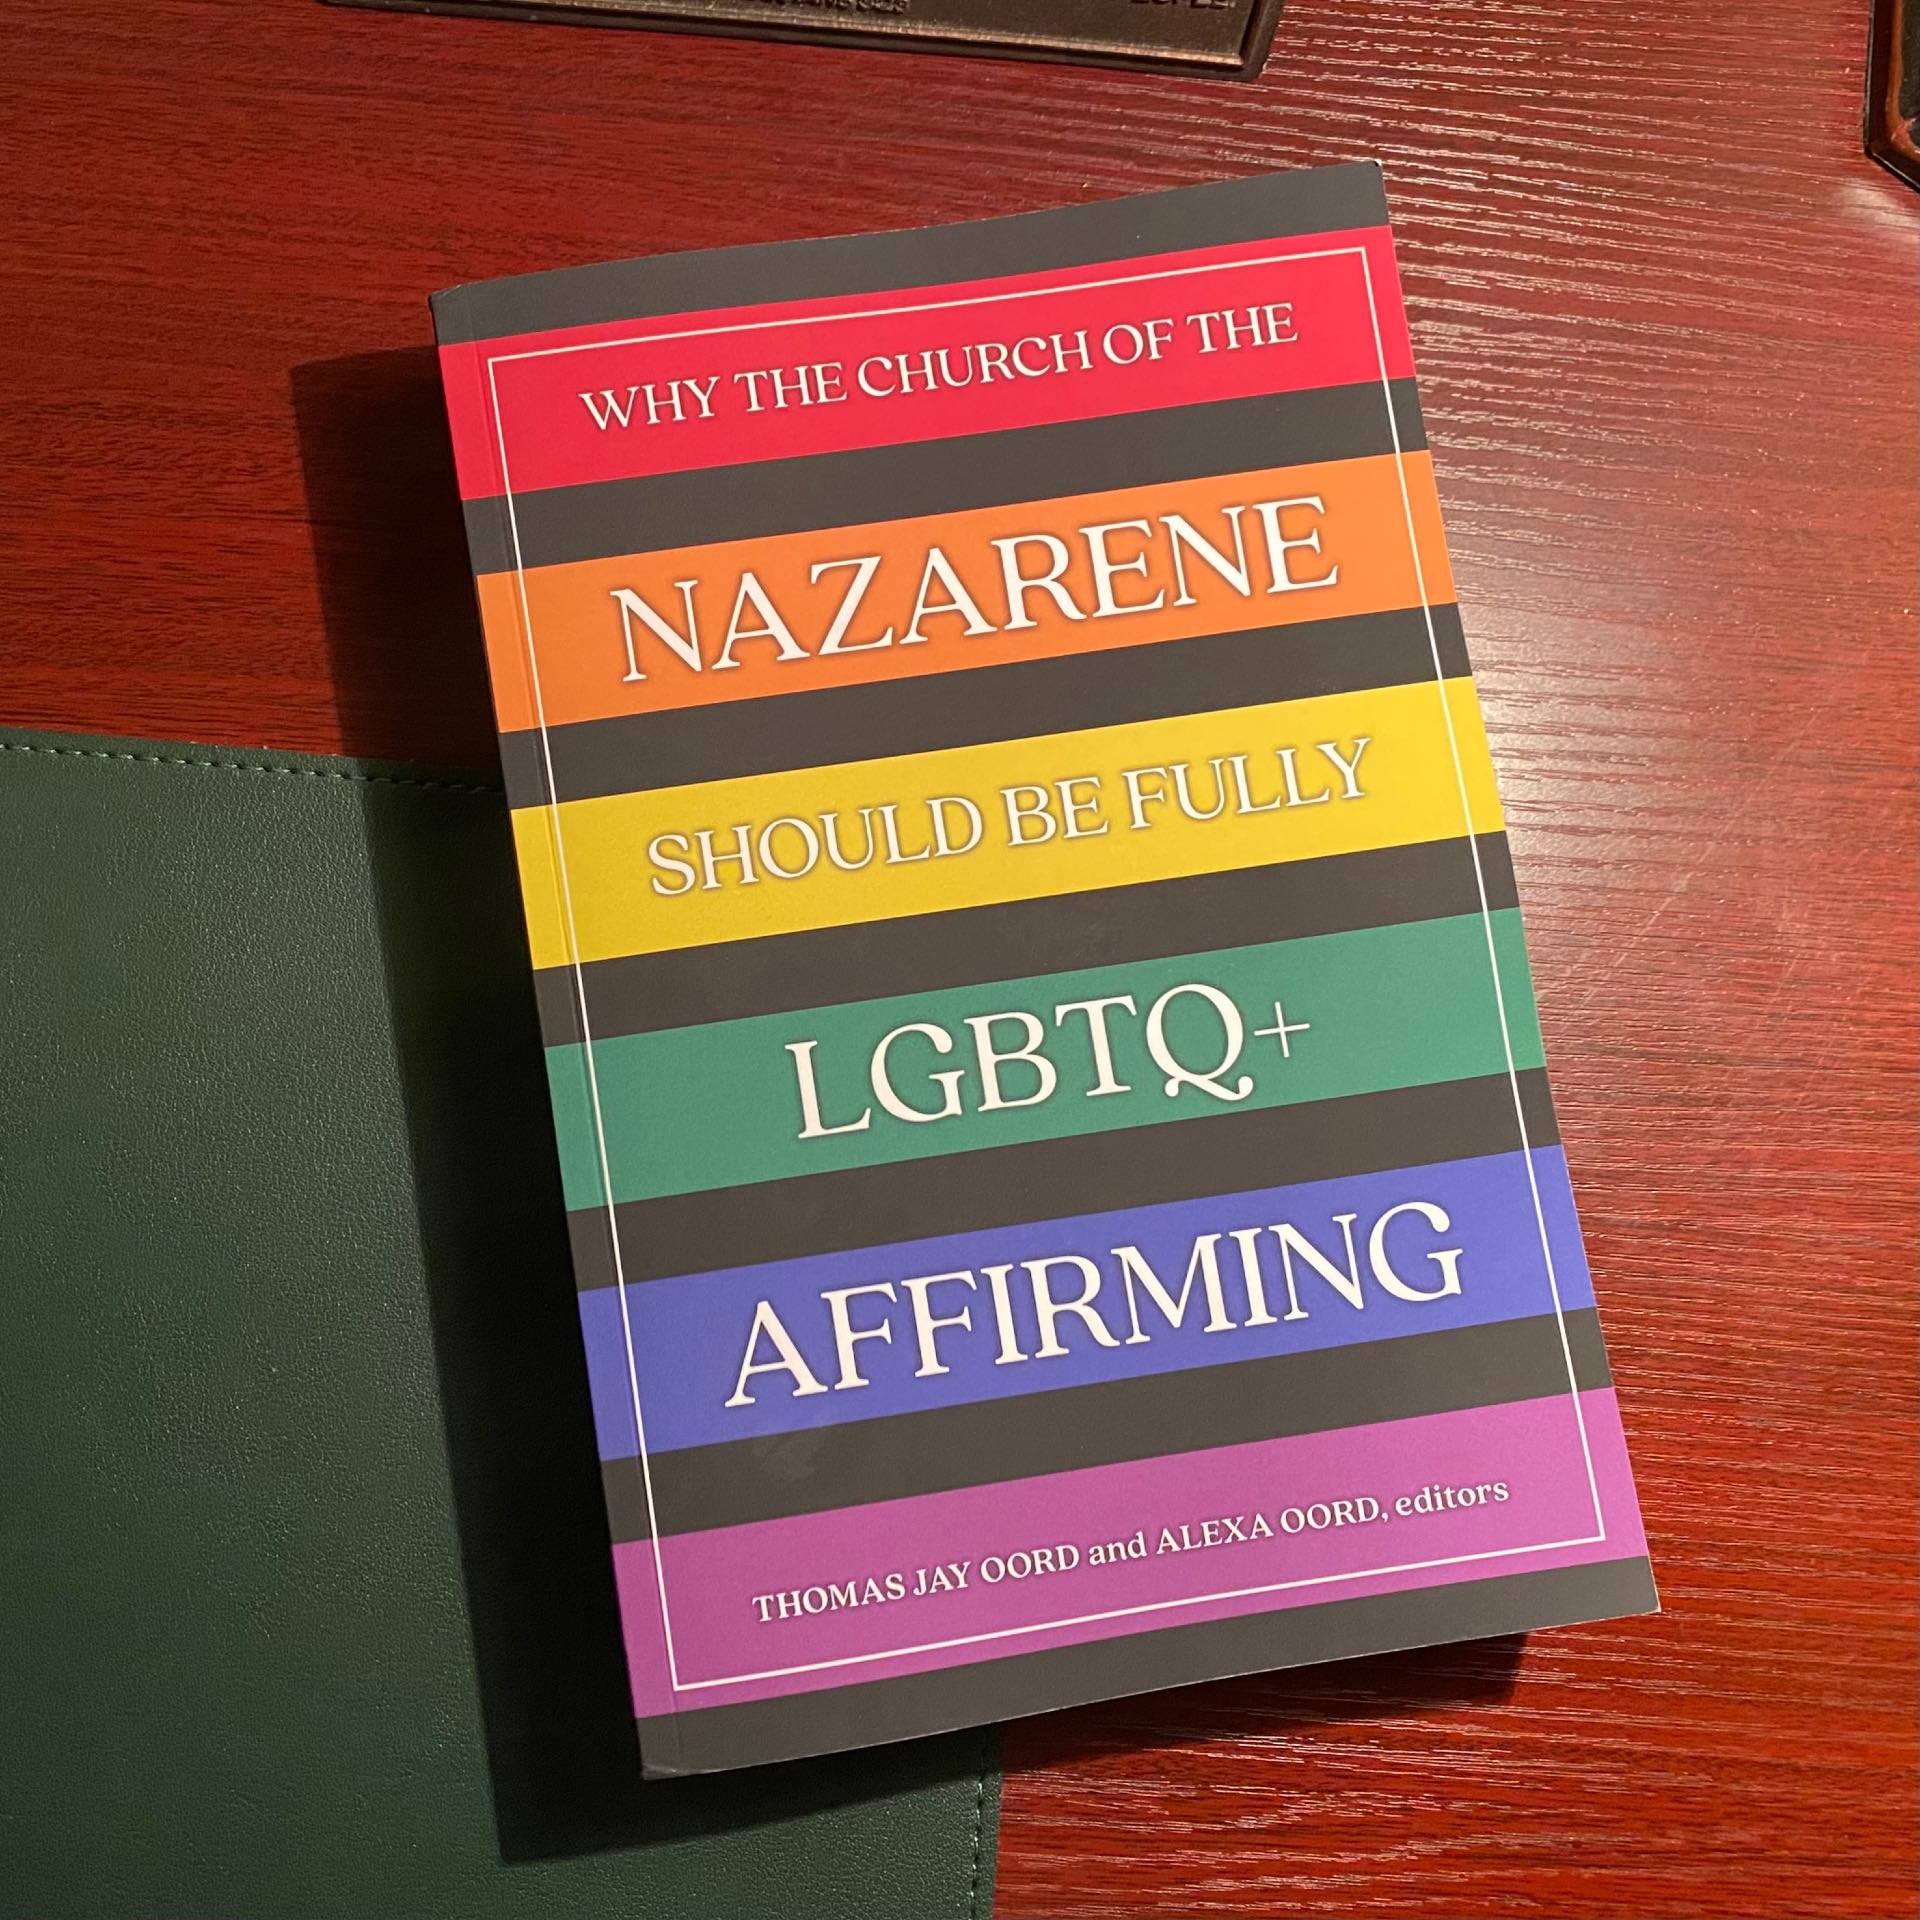 Rev. Dee Kelley's essay was published in the book Why the Church of the Nazarene Should Be Fully LGBTQ+ Affirming.